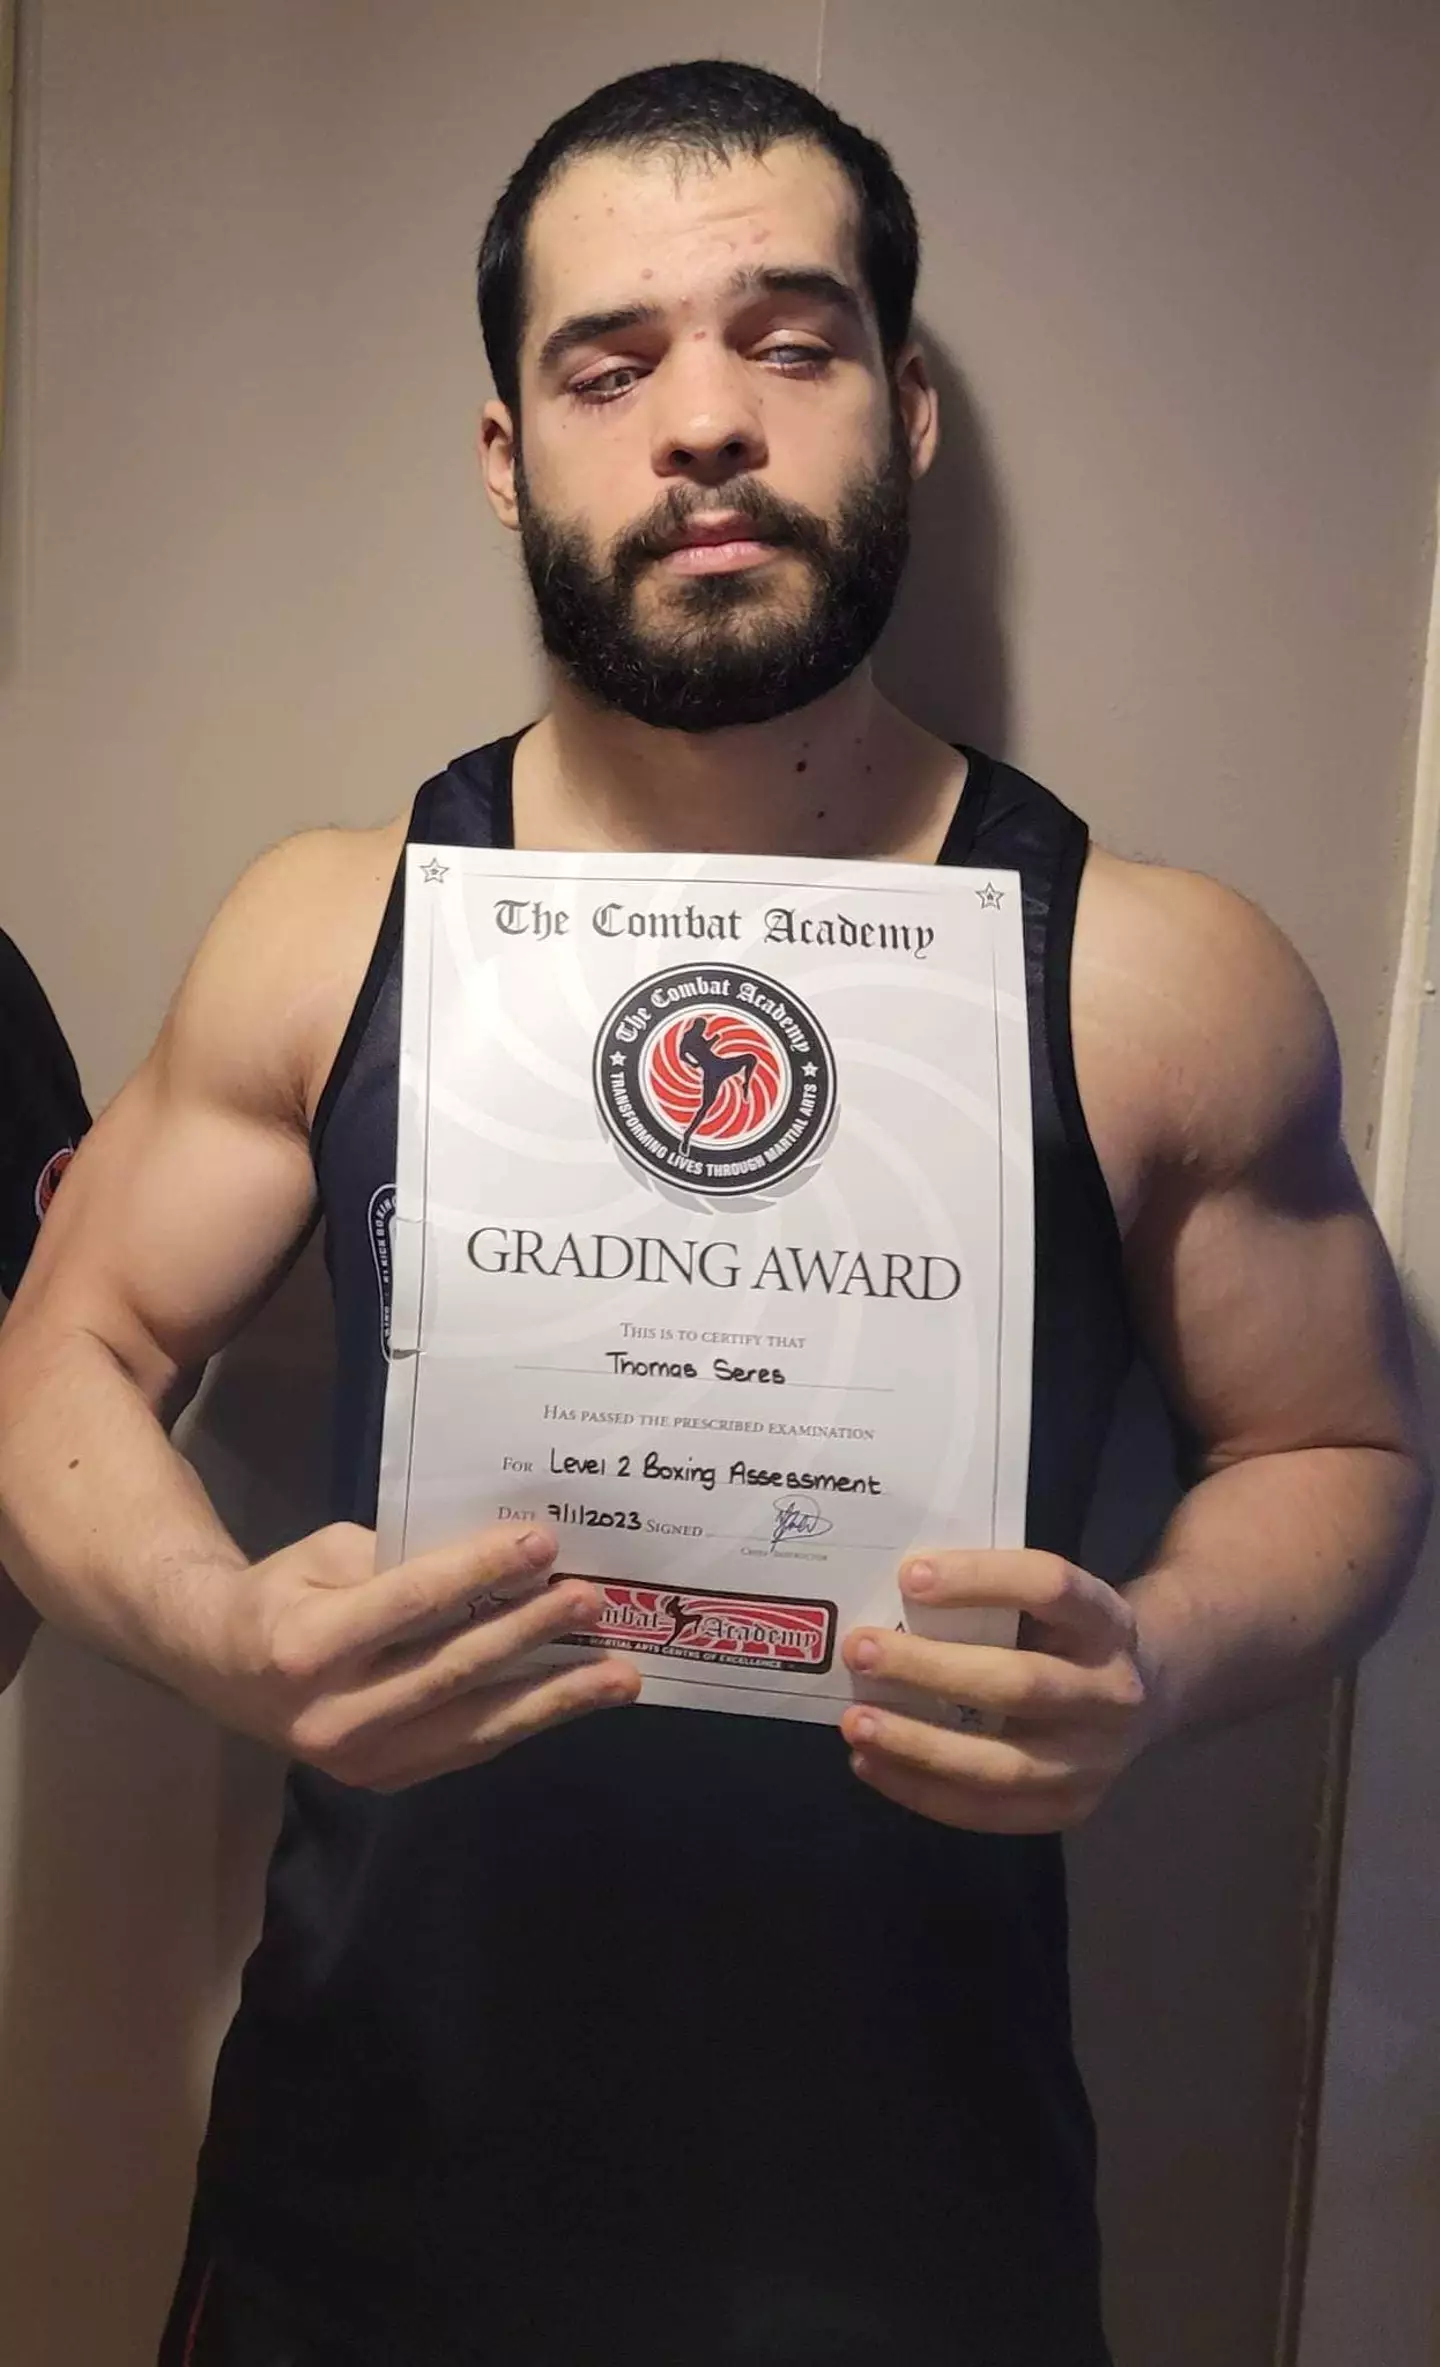 He's already attained a level two boxing certificate from his gym.